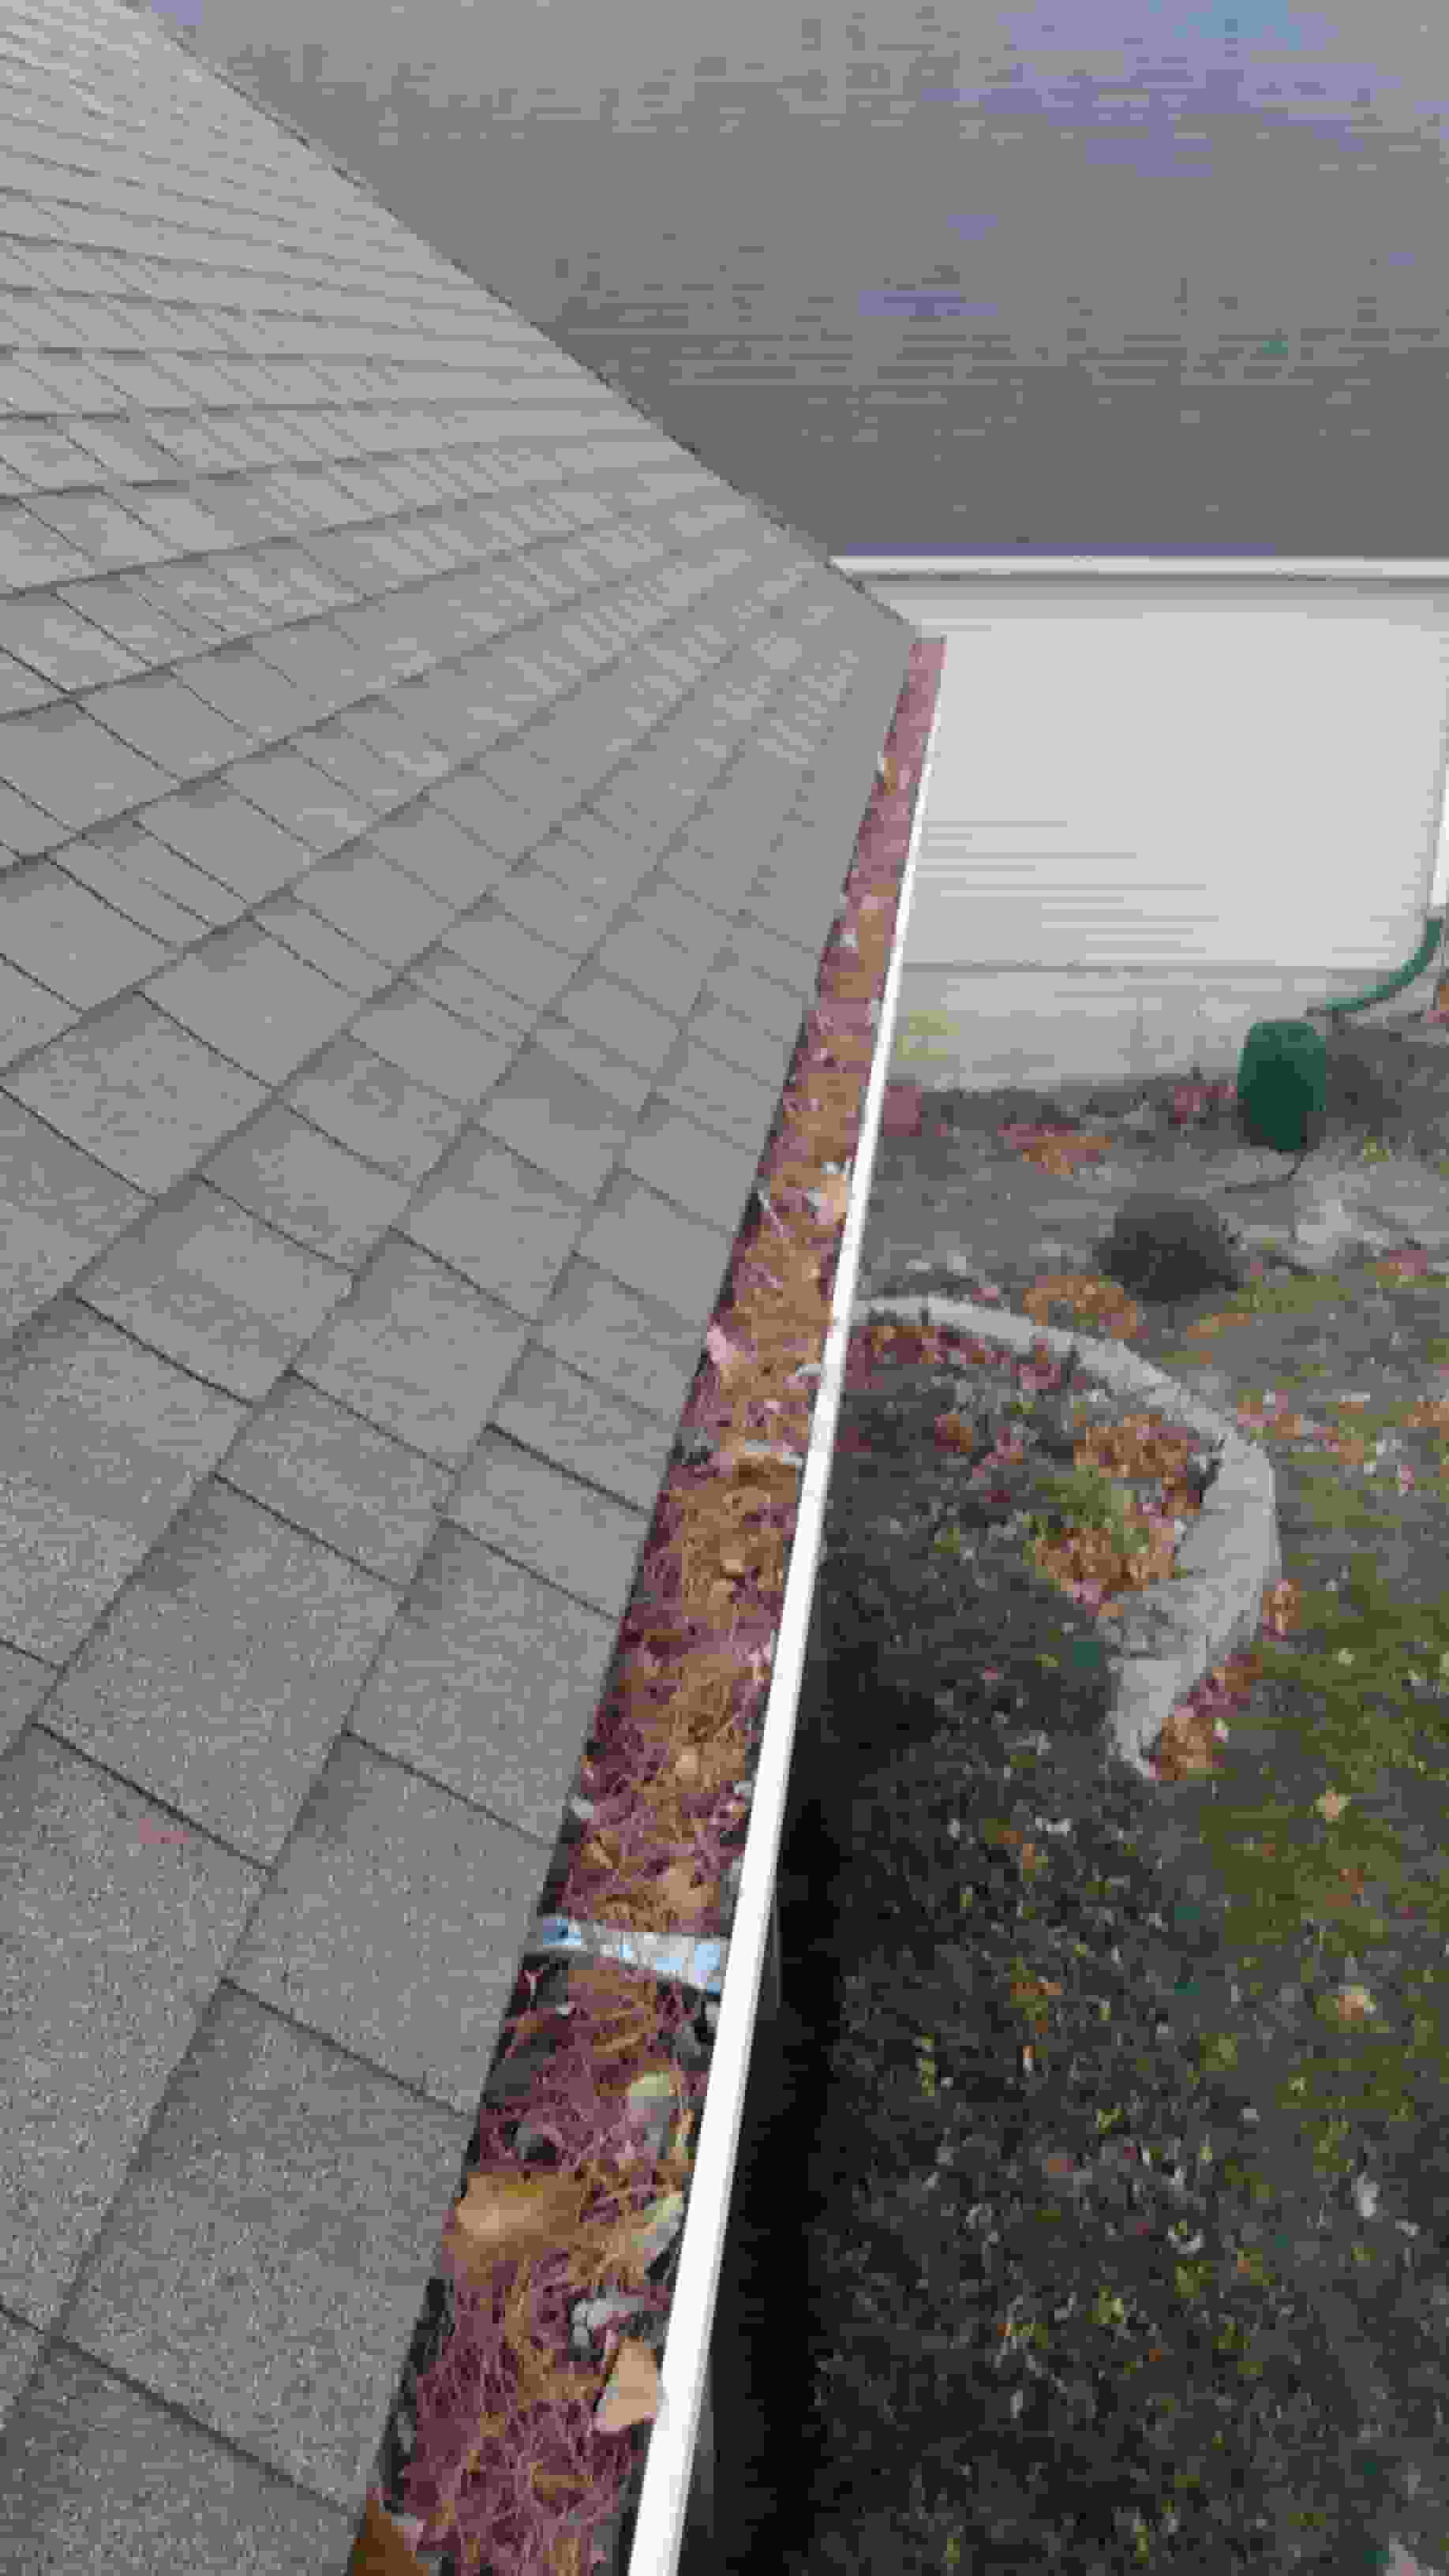 how to remove gutter guards